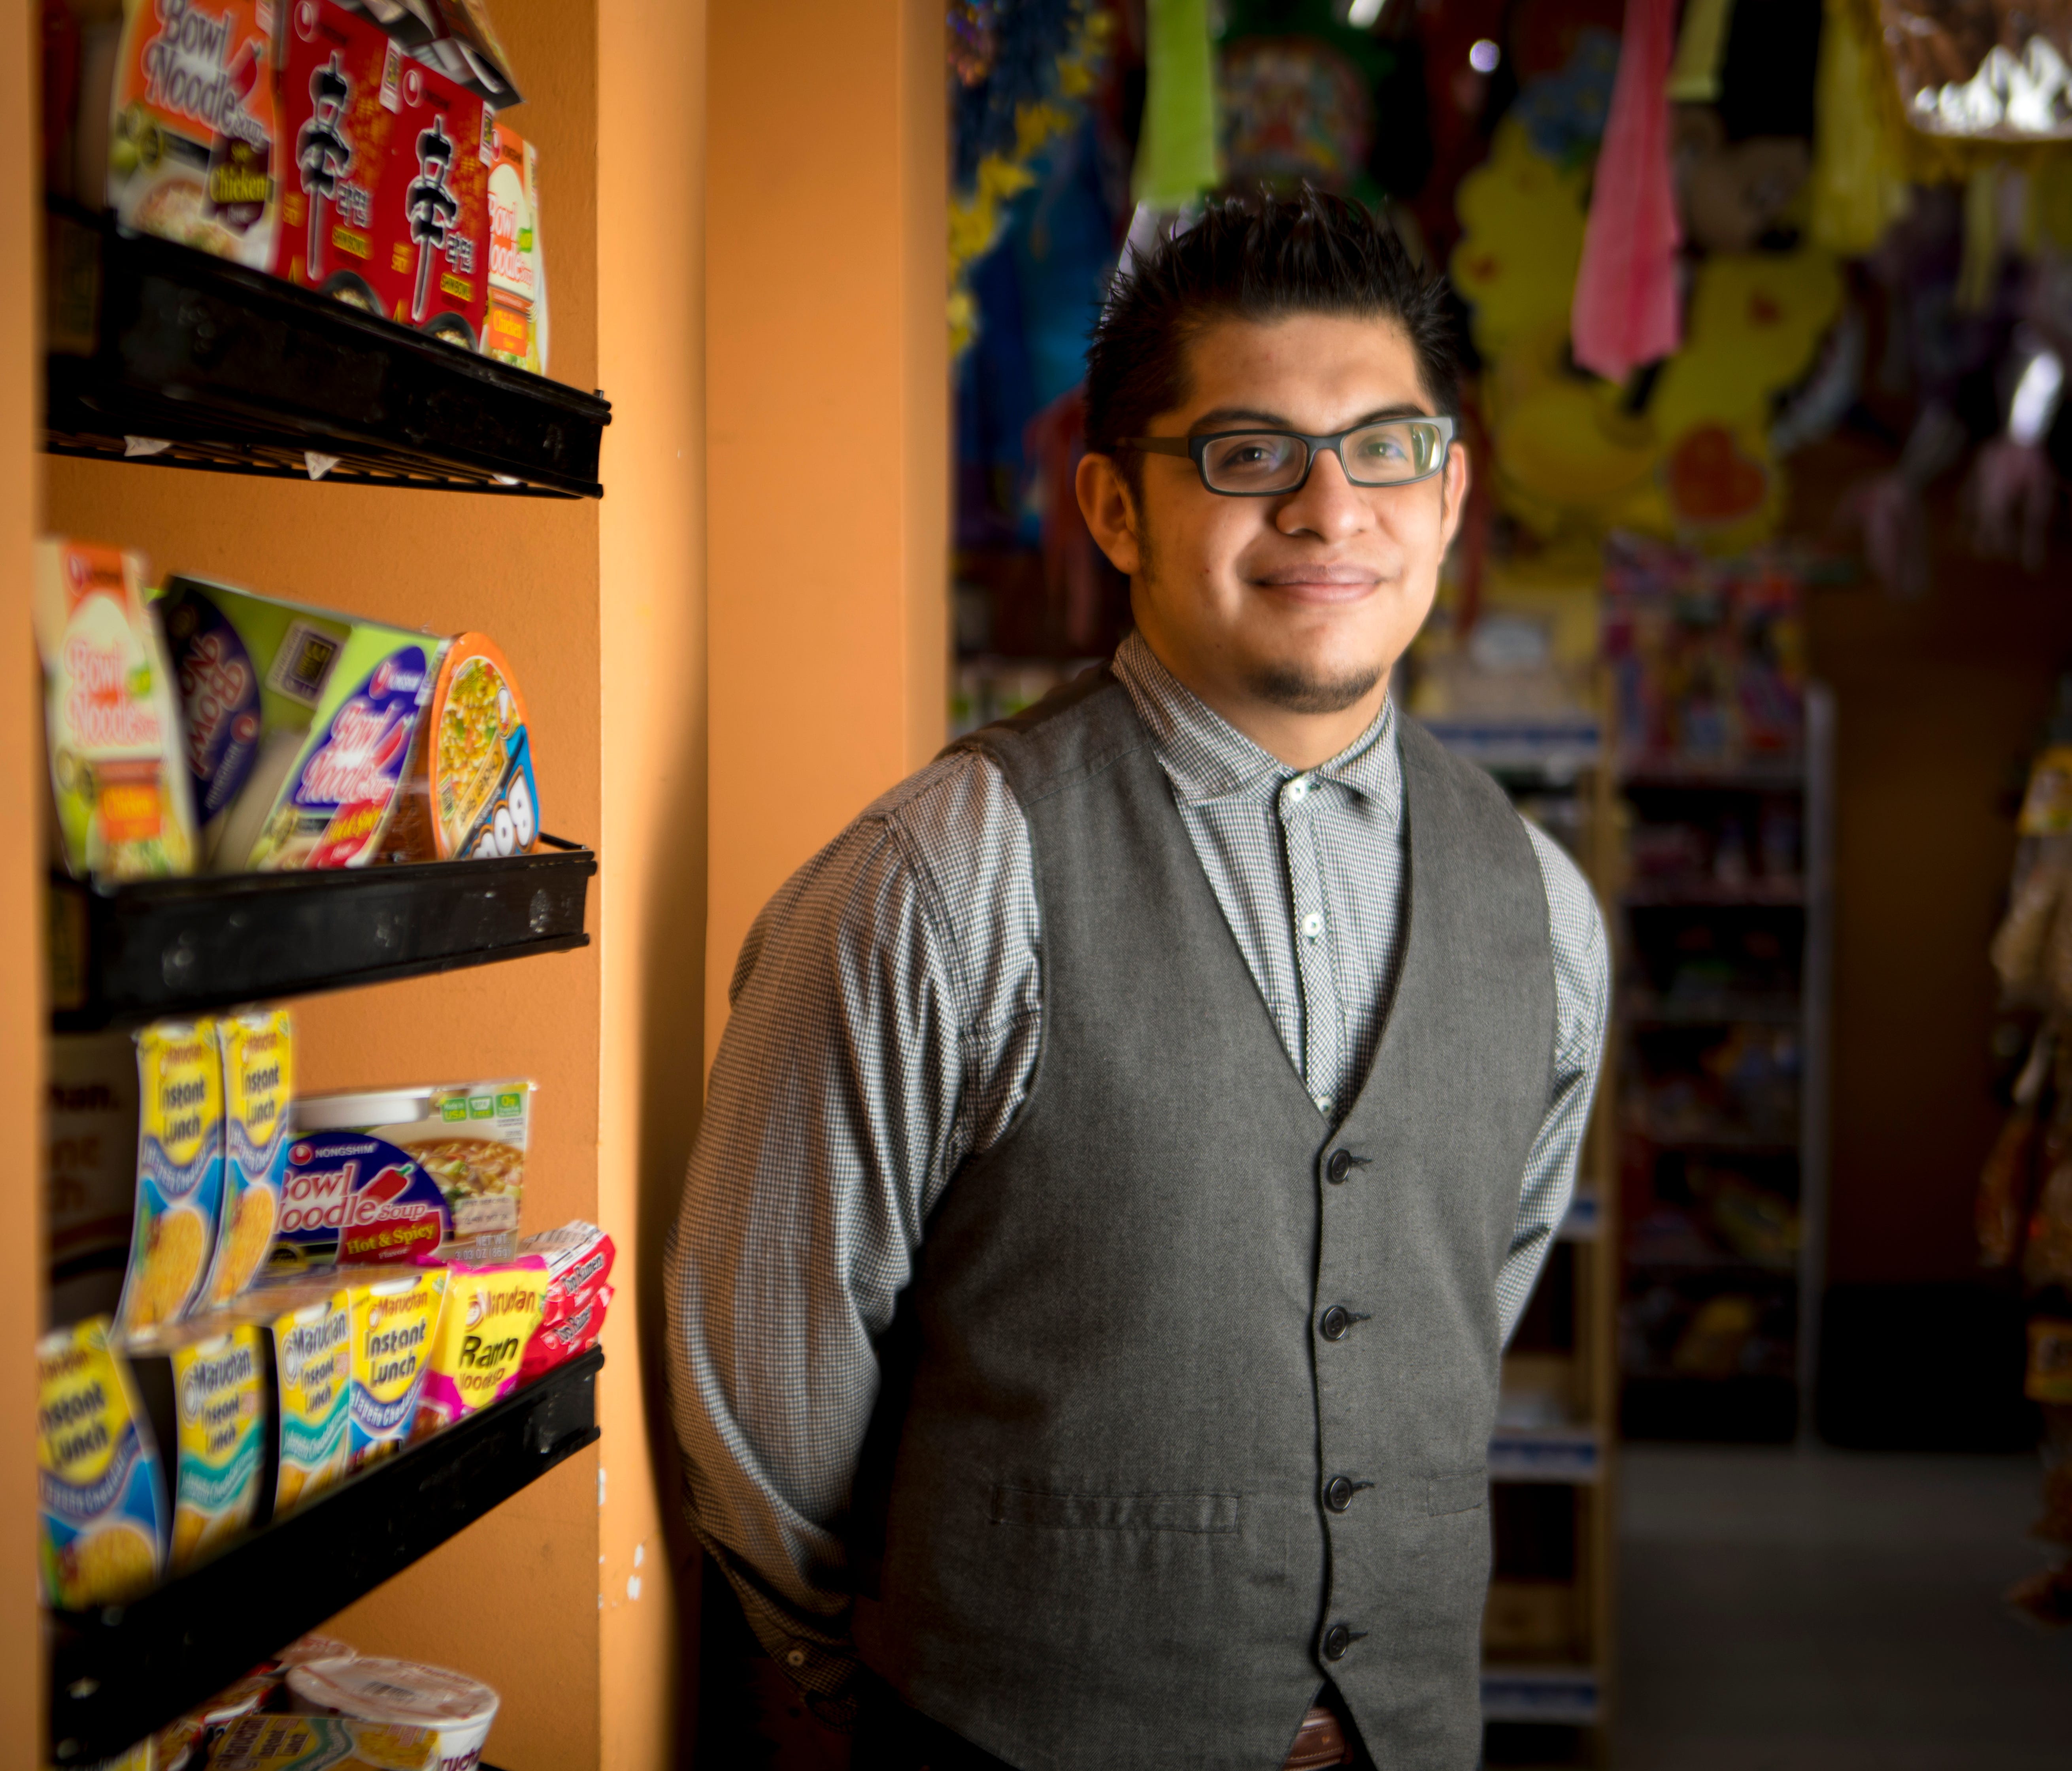 Wed., March 1, 2017: Mauricio Vivar, 20, has been having conversations with his parents, who are undocumented about who to do if they are deported. Viva, who has legal status through Deferred Action for Childhood Arrivals, known more widely as DACA o